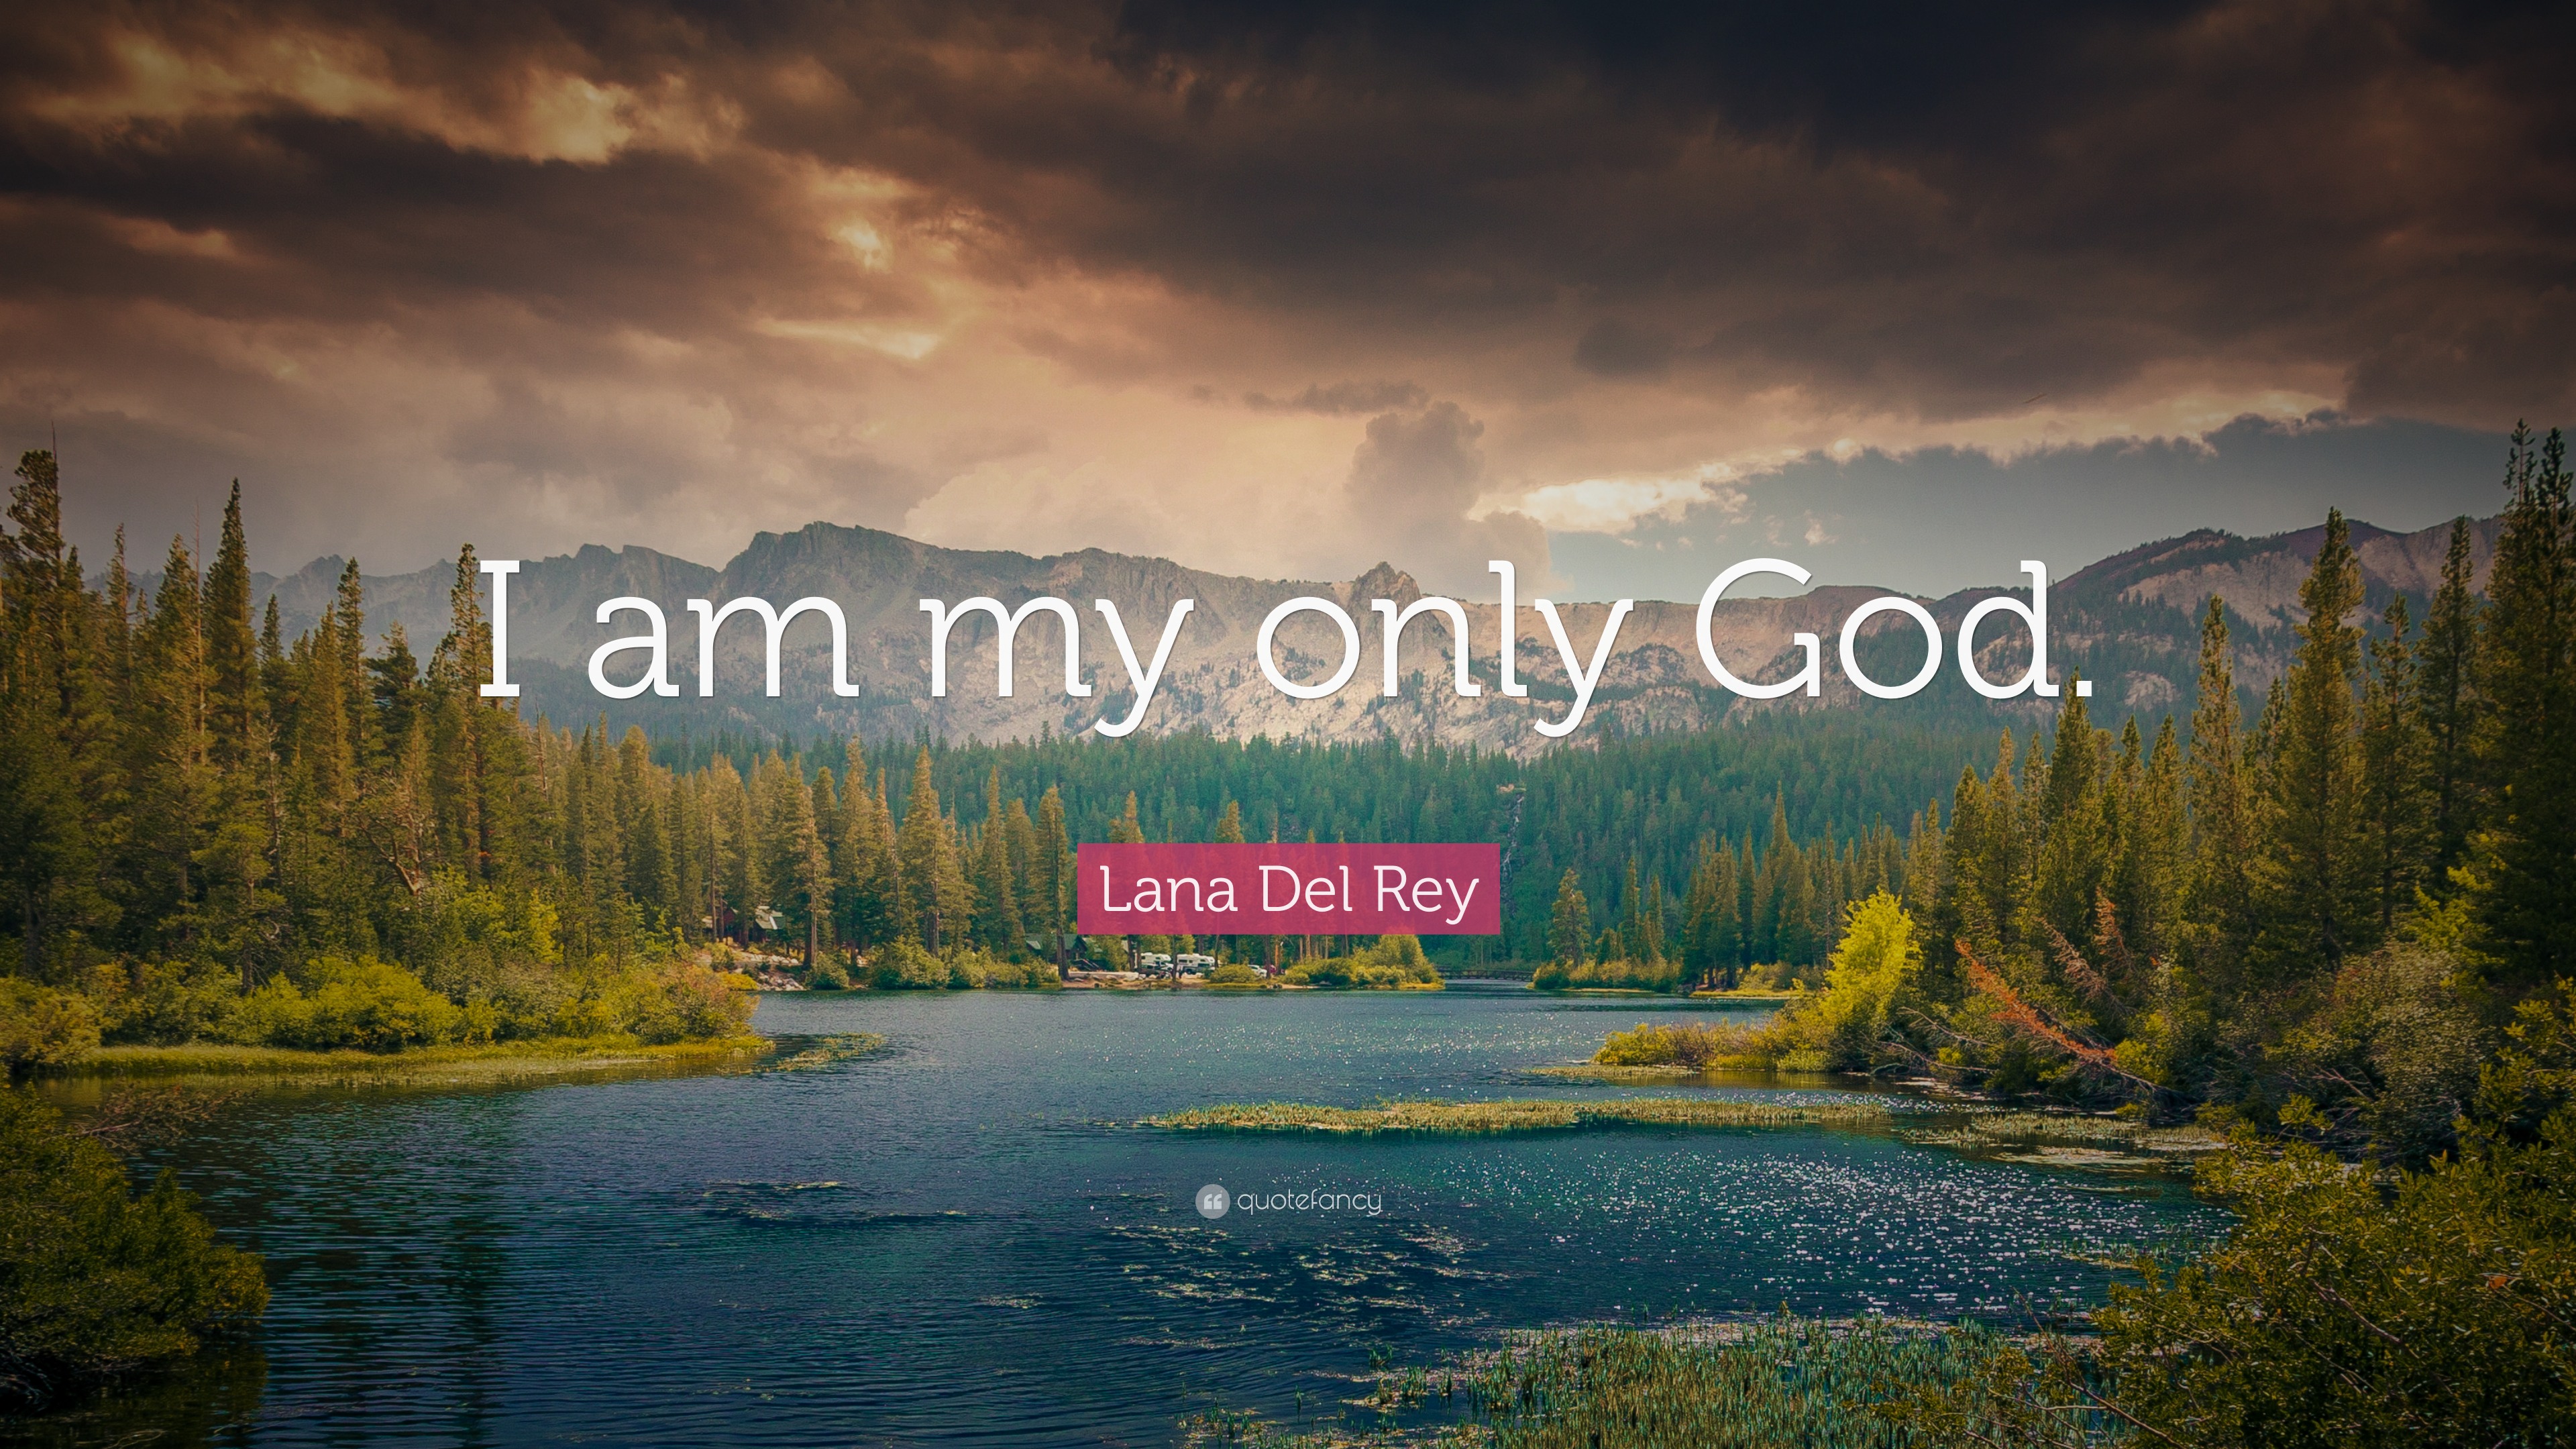 Lana Del Rey Quote: “I am my only God.”